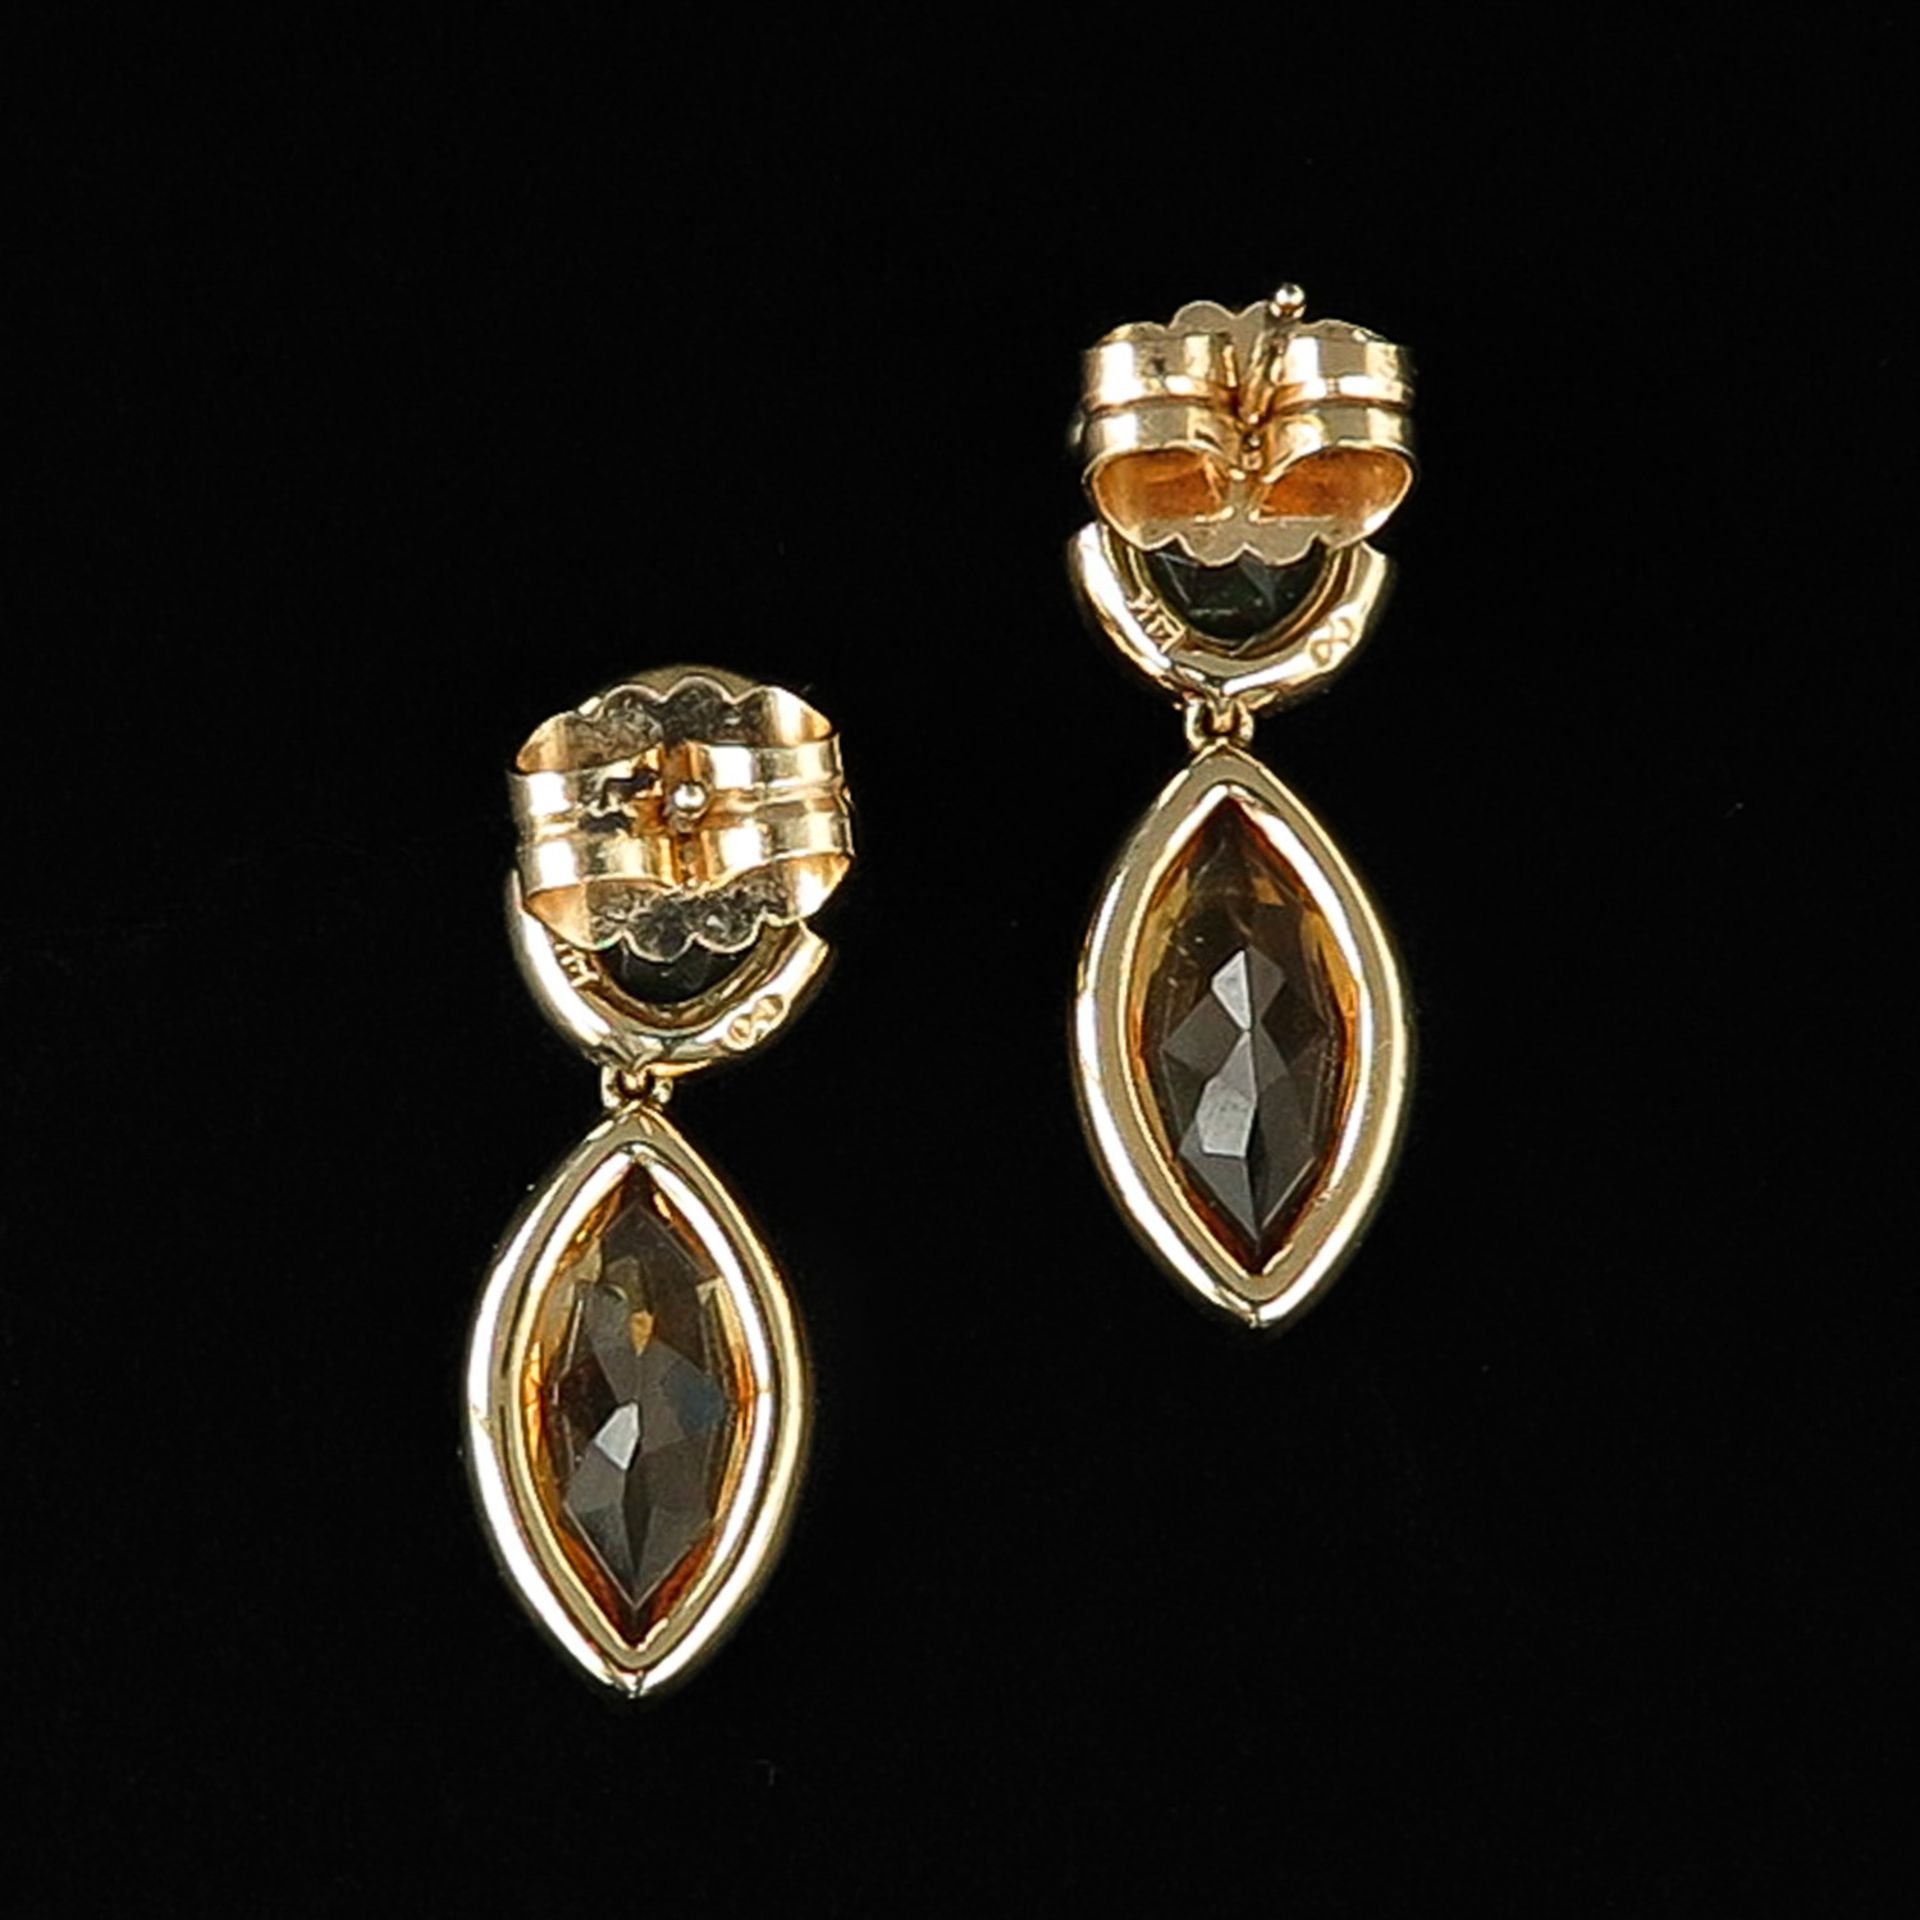 A Pair of 14KG Peridot and Citrine Earrings - Image 2 of 5